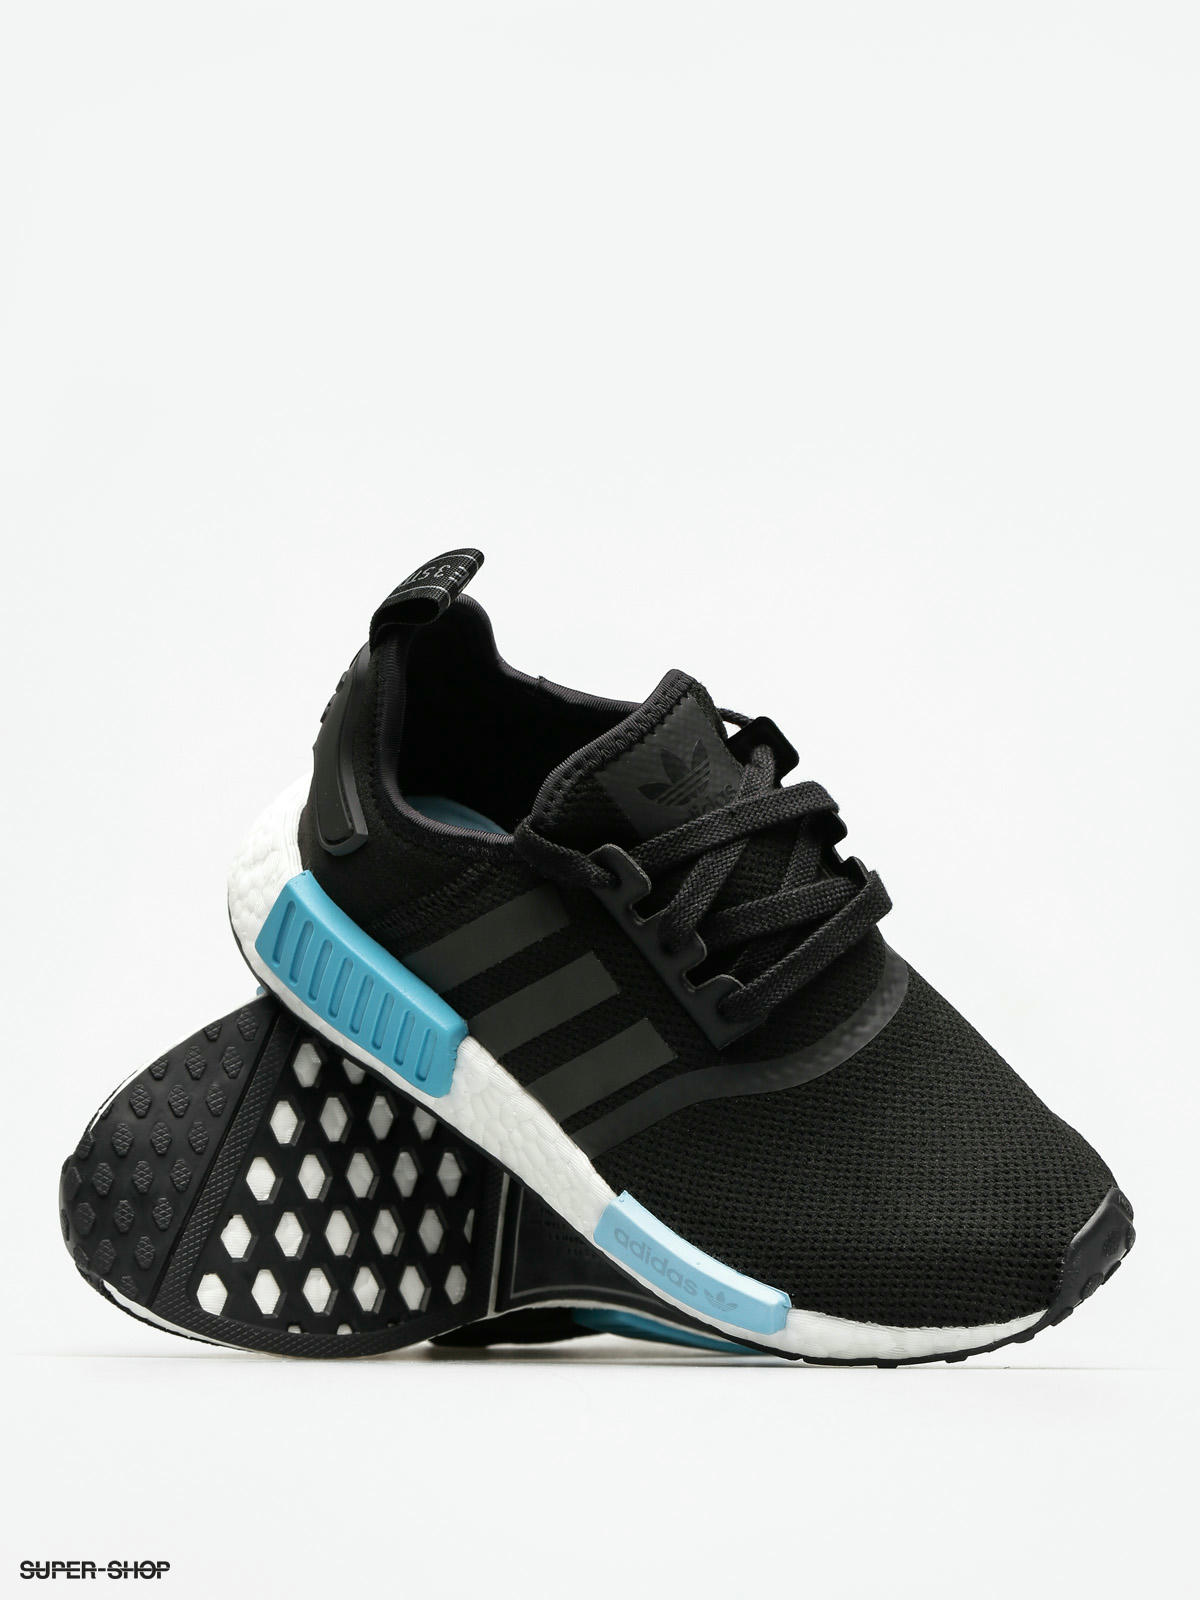 adidas Shoes Nmd Wmn (core black/core black/icey blue f17)